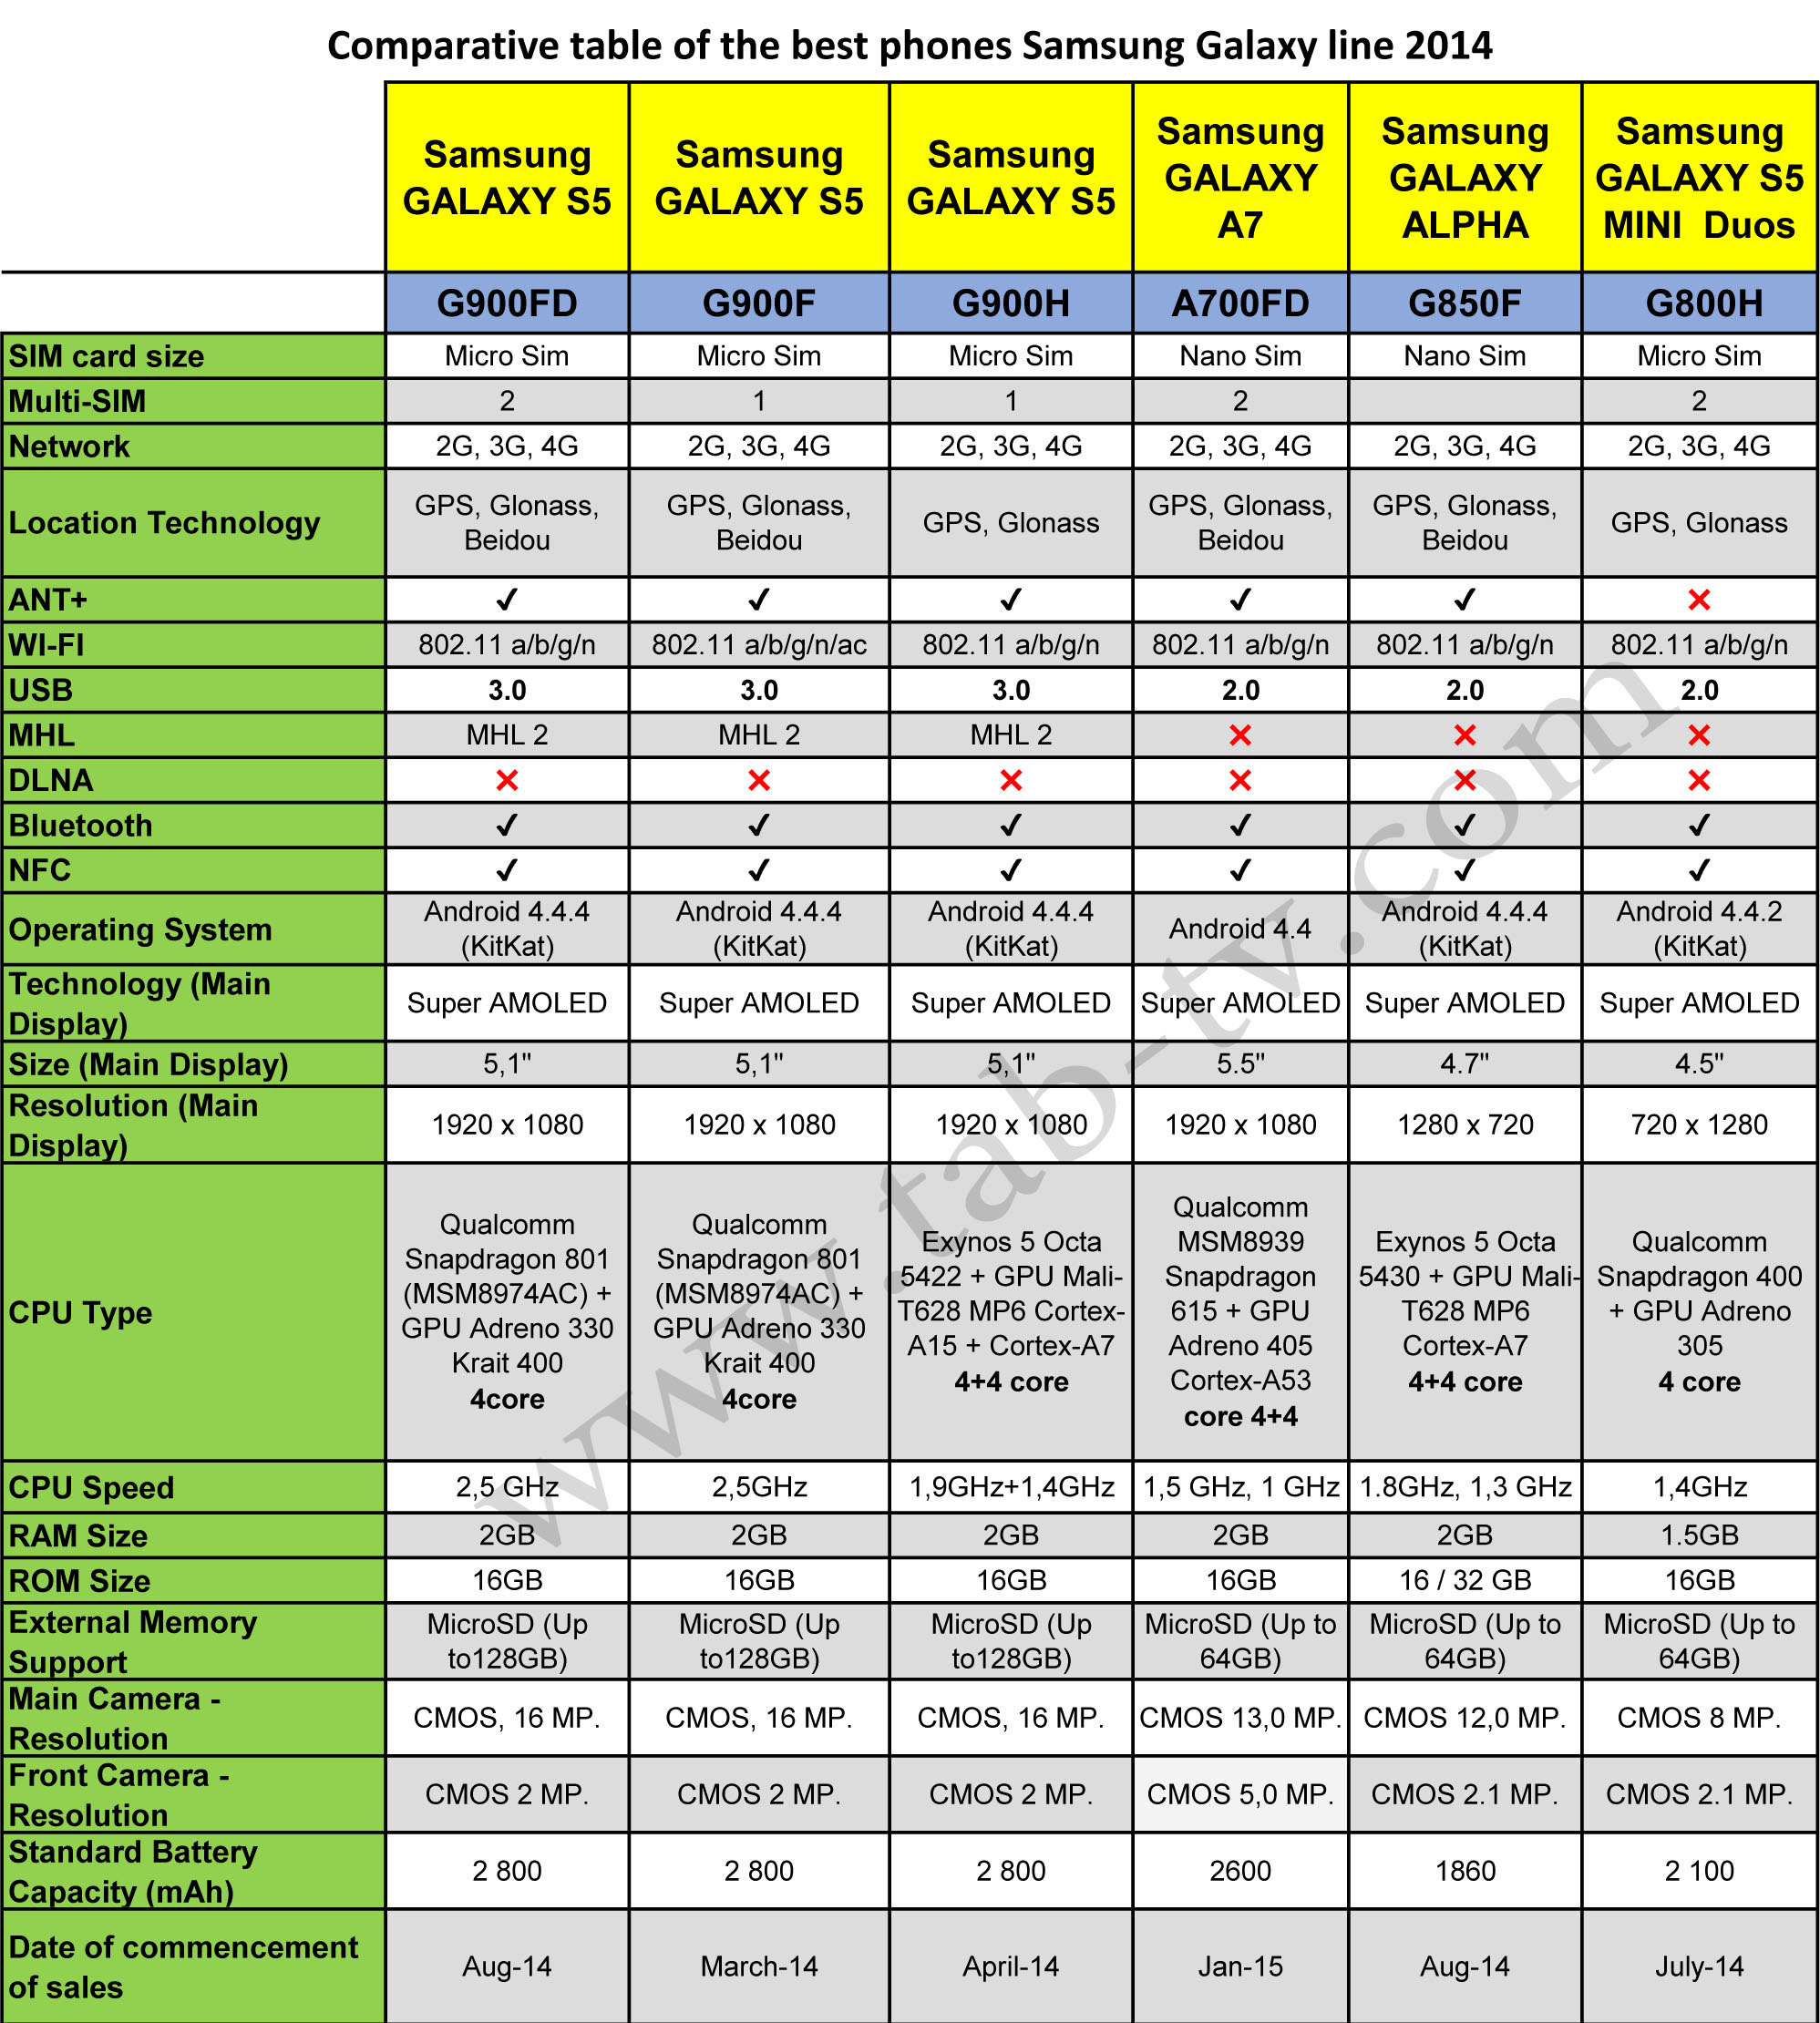 Comparative table of the best phones Samsung Galaxy line 2014